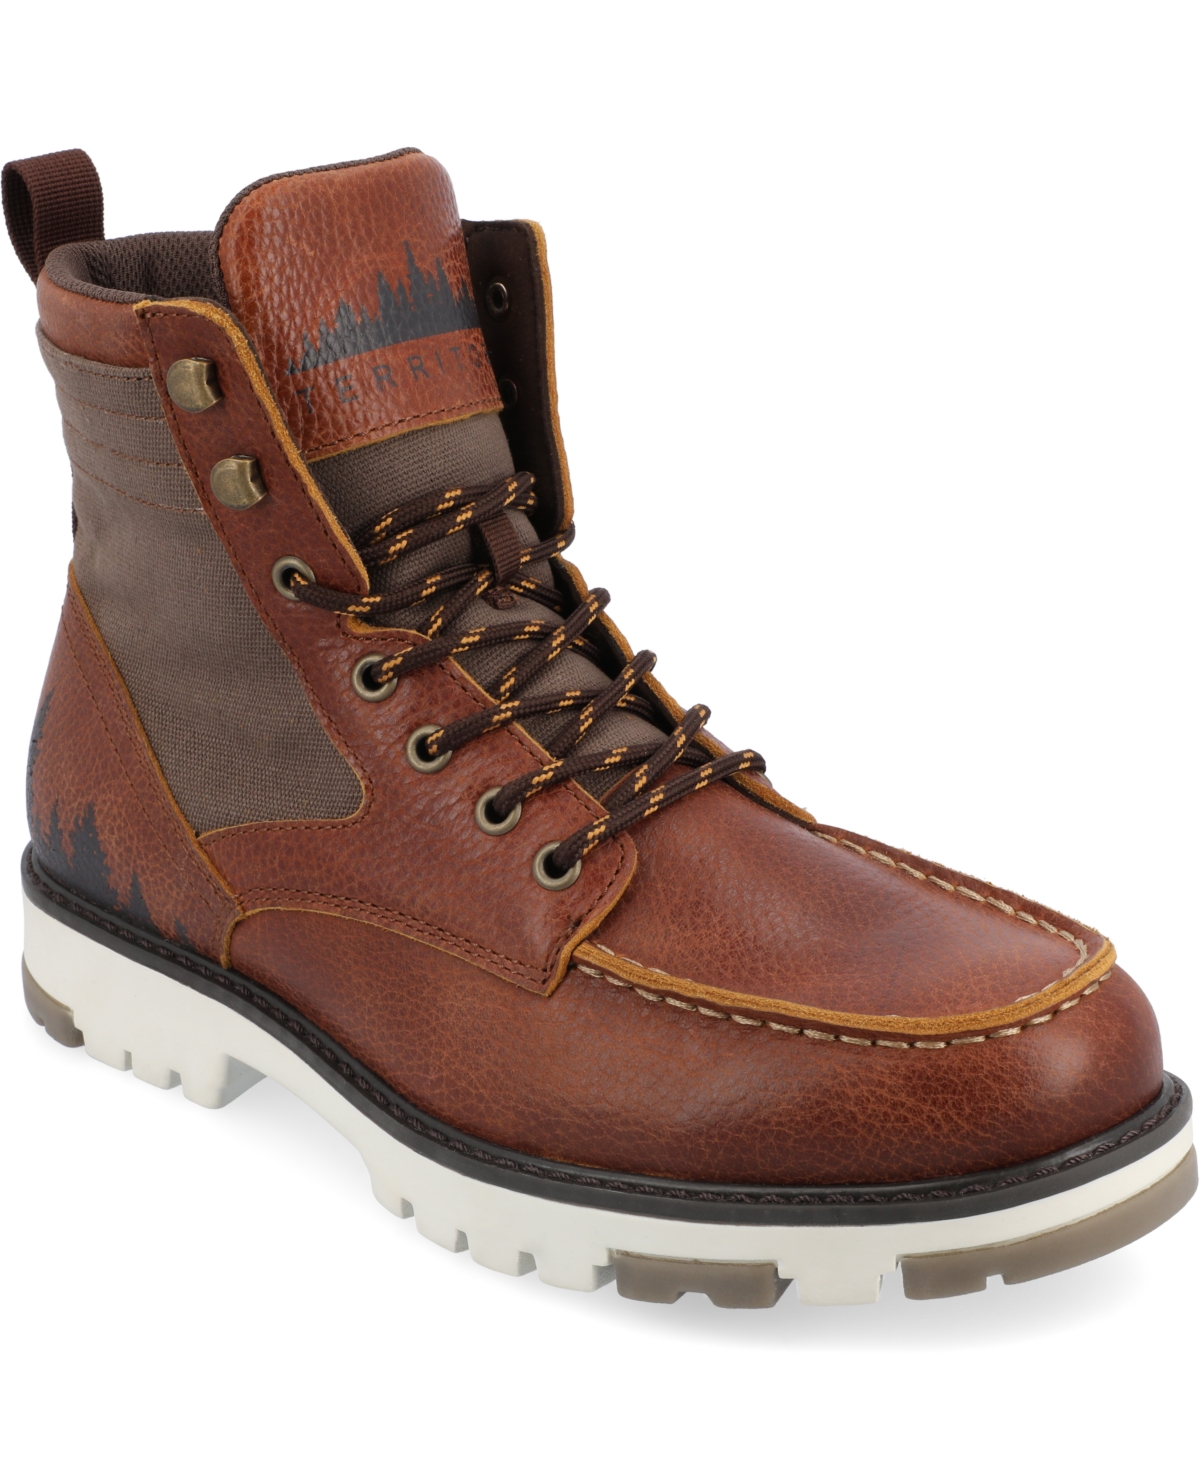 Men's Timber Tru Comfort Foam Moc Toe Lace-up Ankle Boots - Brown